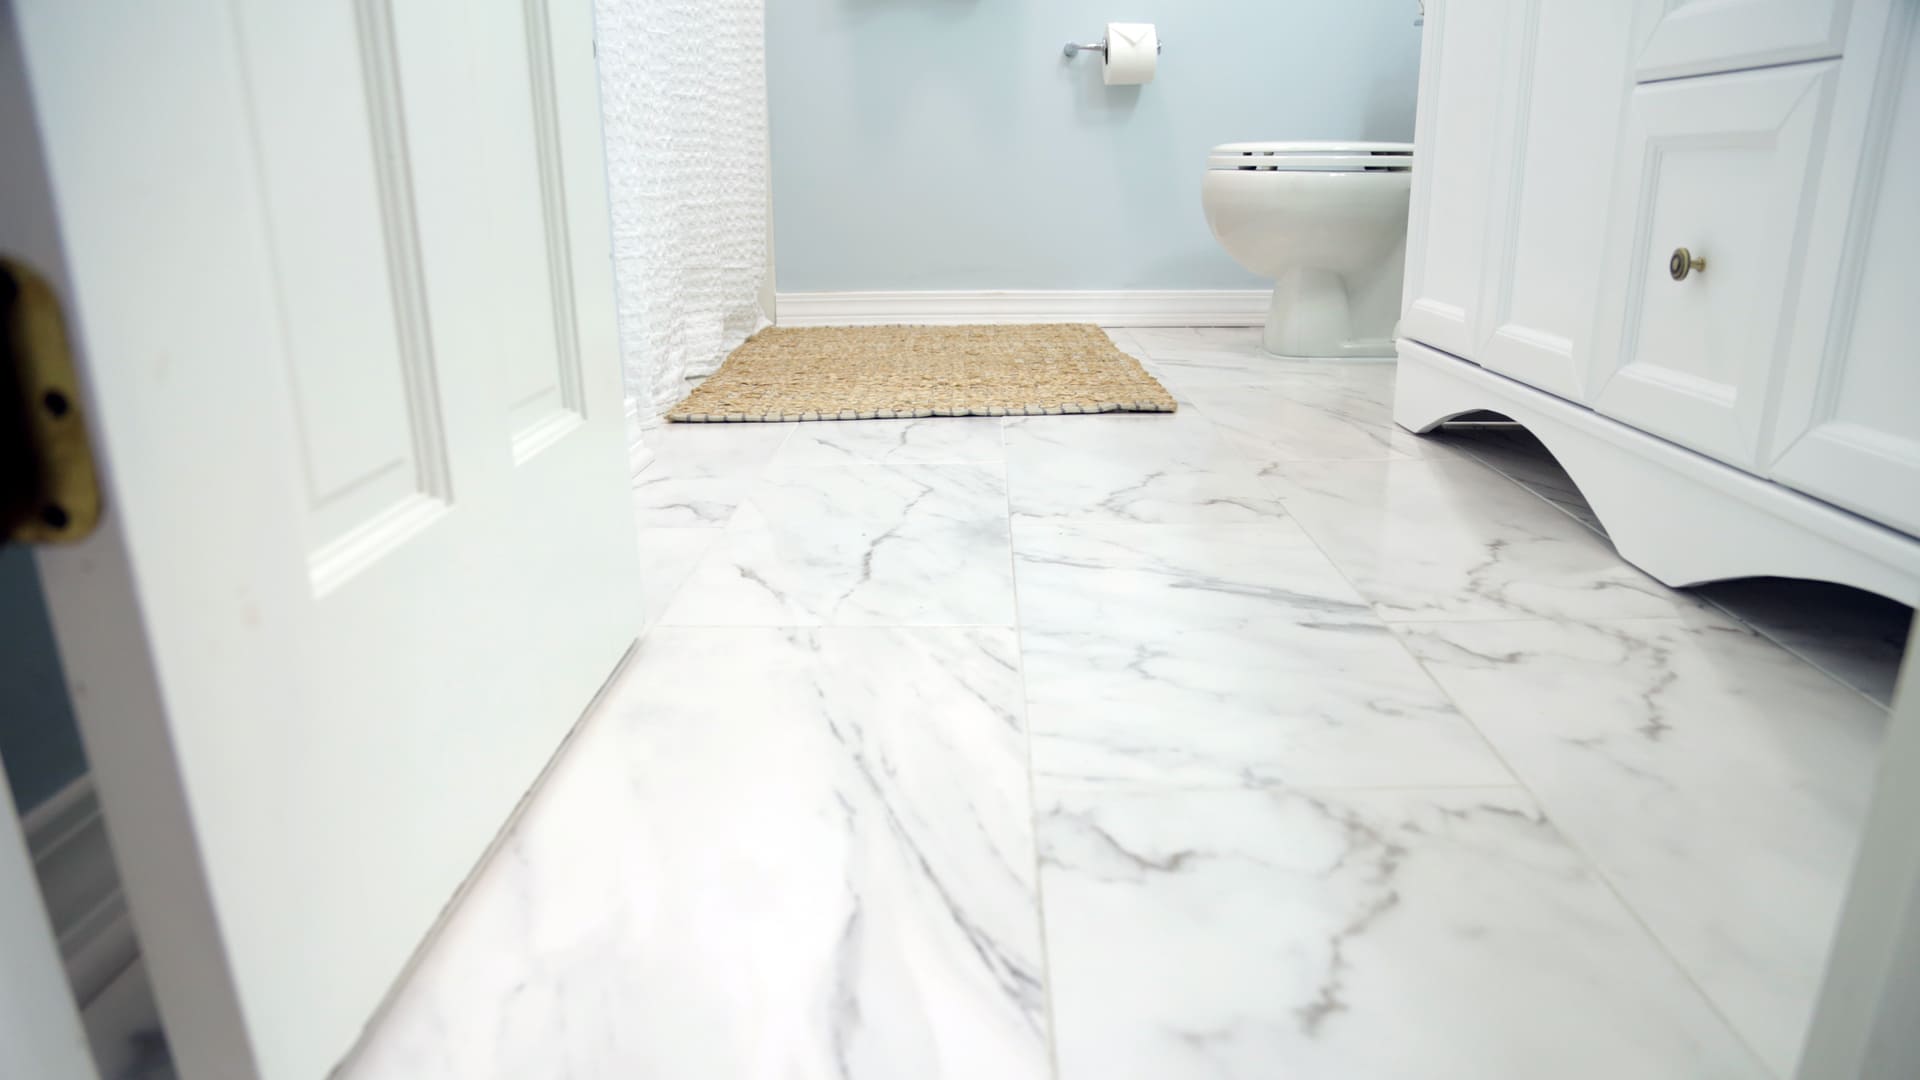 How To Lay Ceramic Tile On A Floor, Laying Down Ceramic Tile Floor